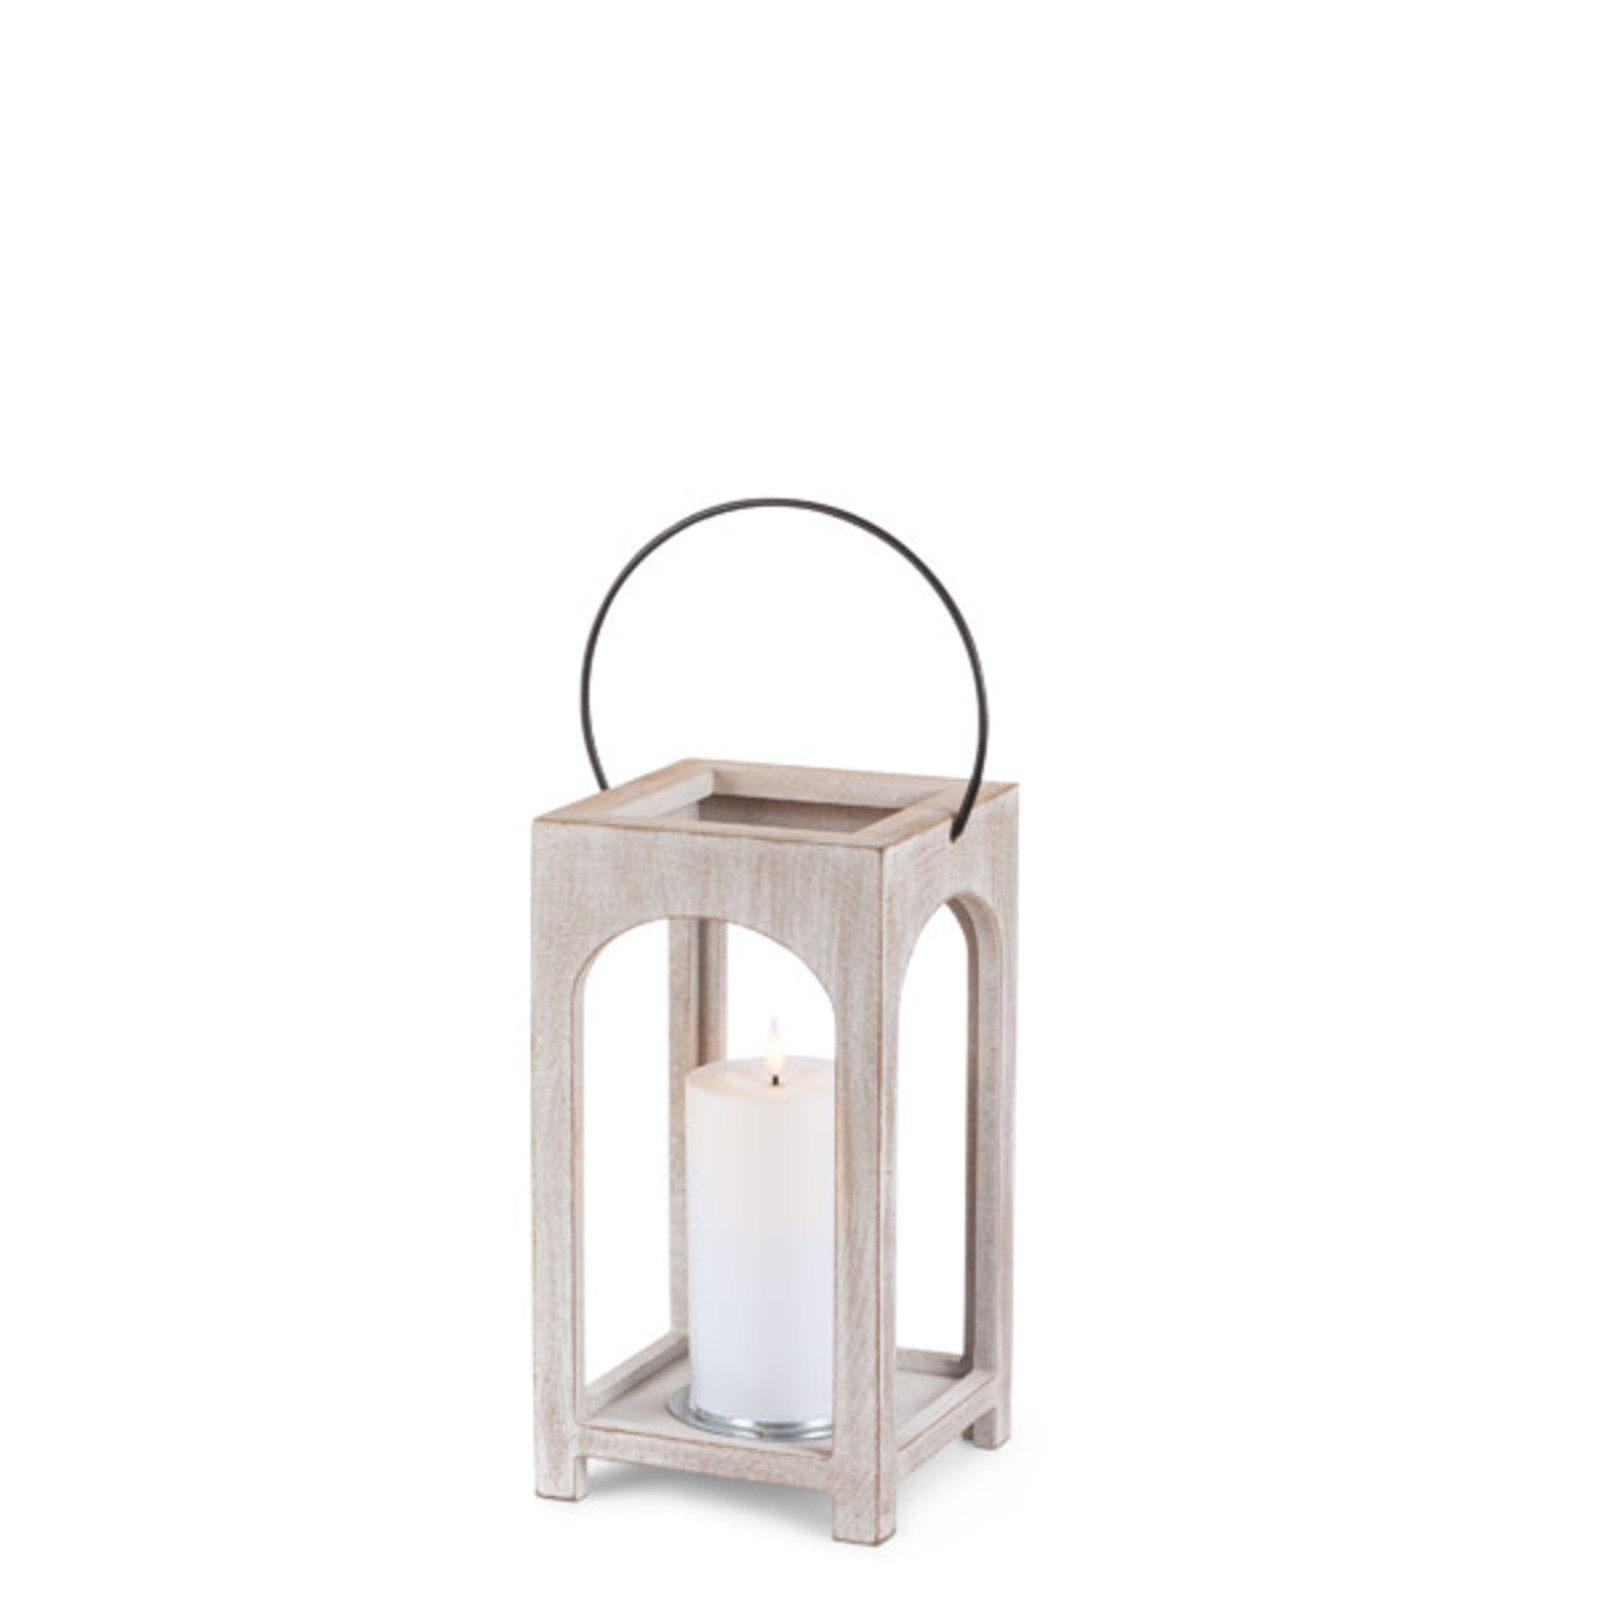 Gerson 5.51"L x 10.24"H Wooden Lantern with LED Resin Candle   46135 loading=